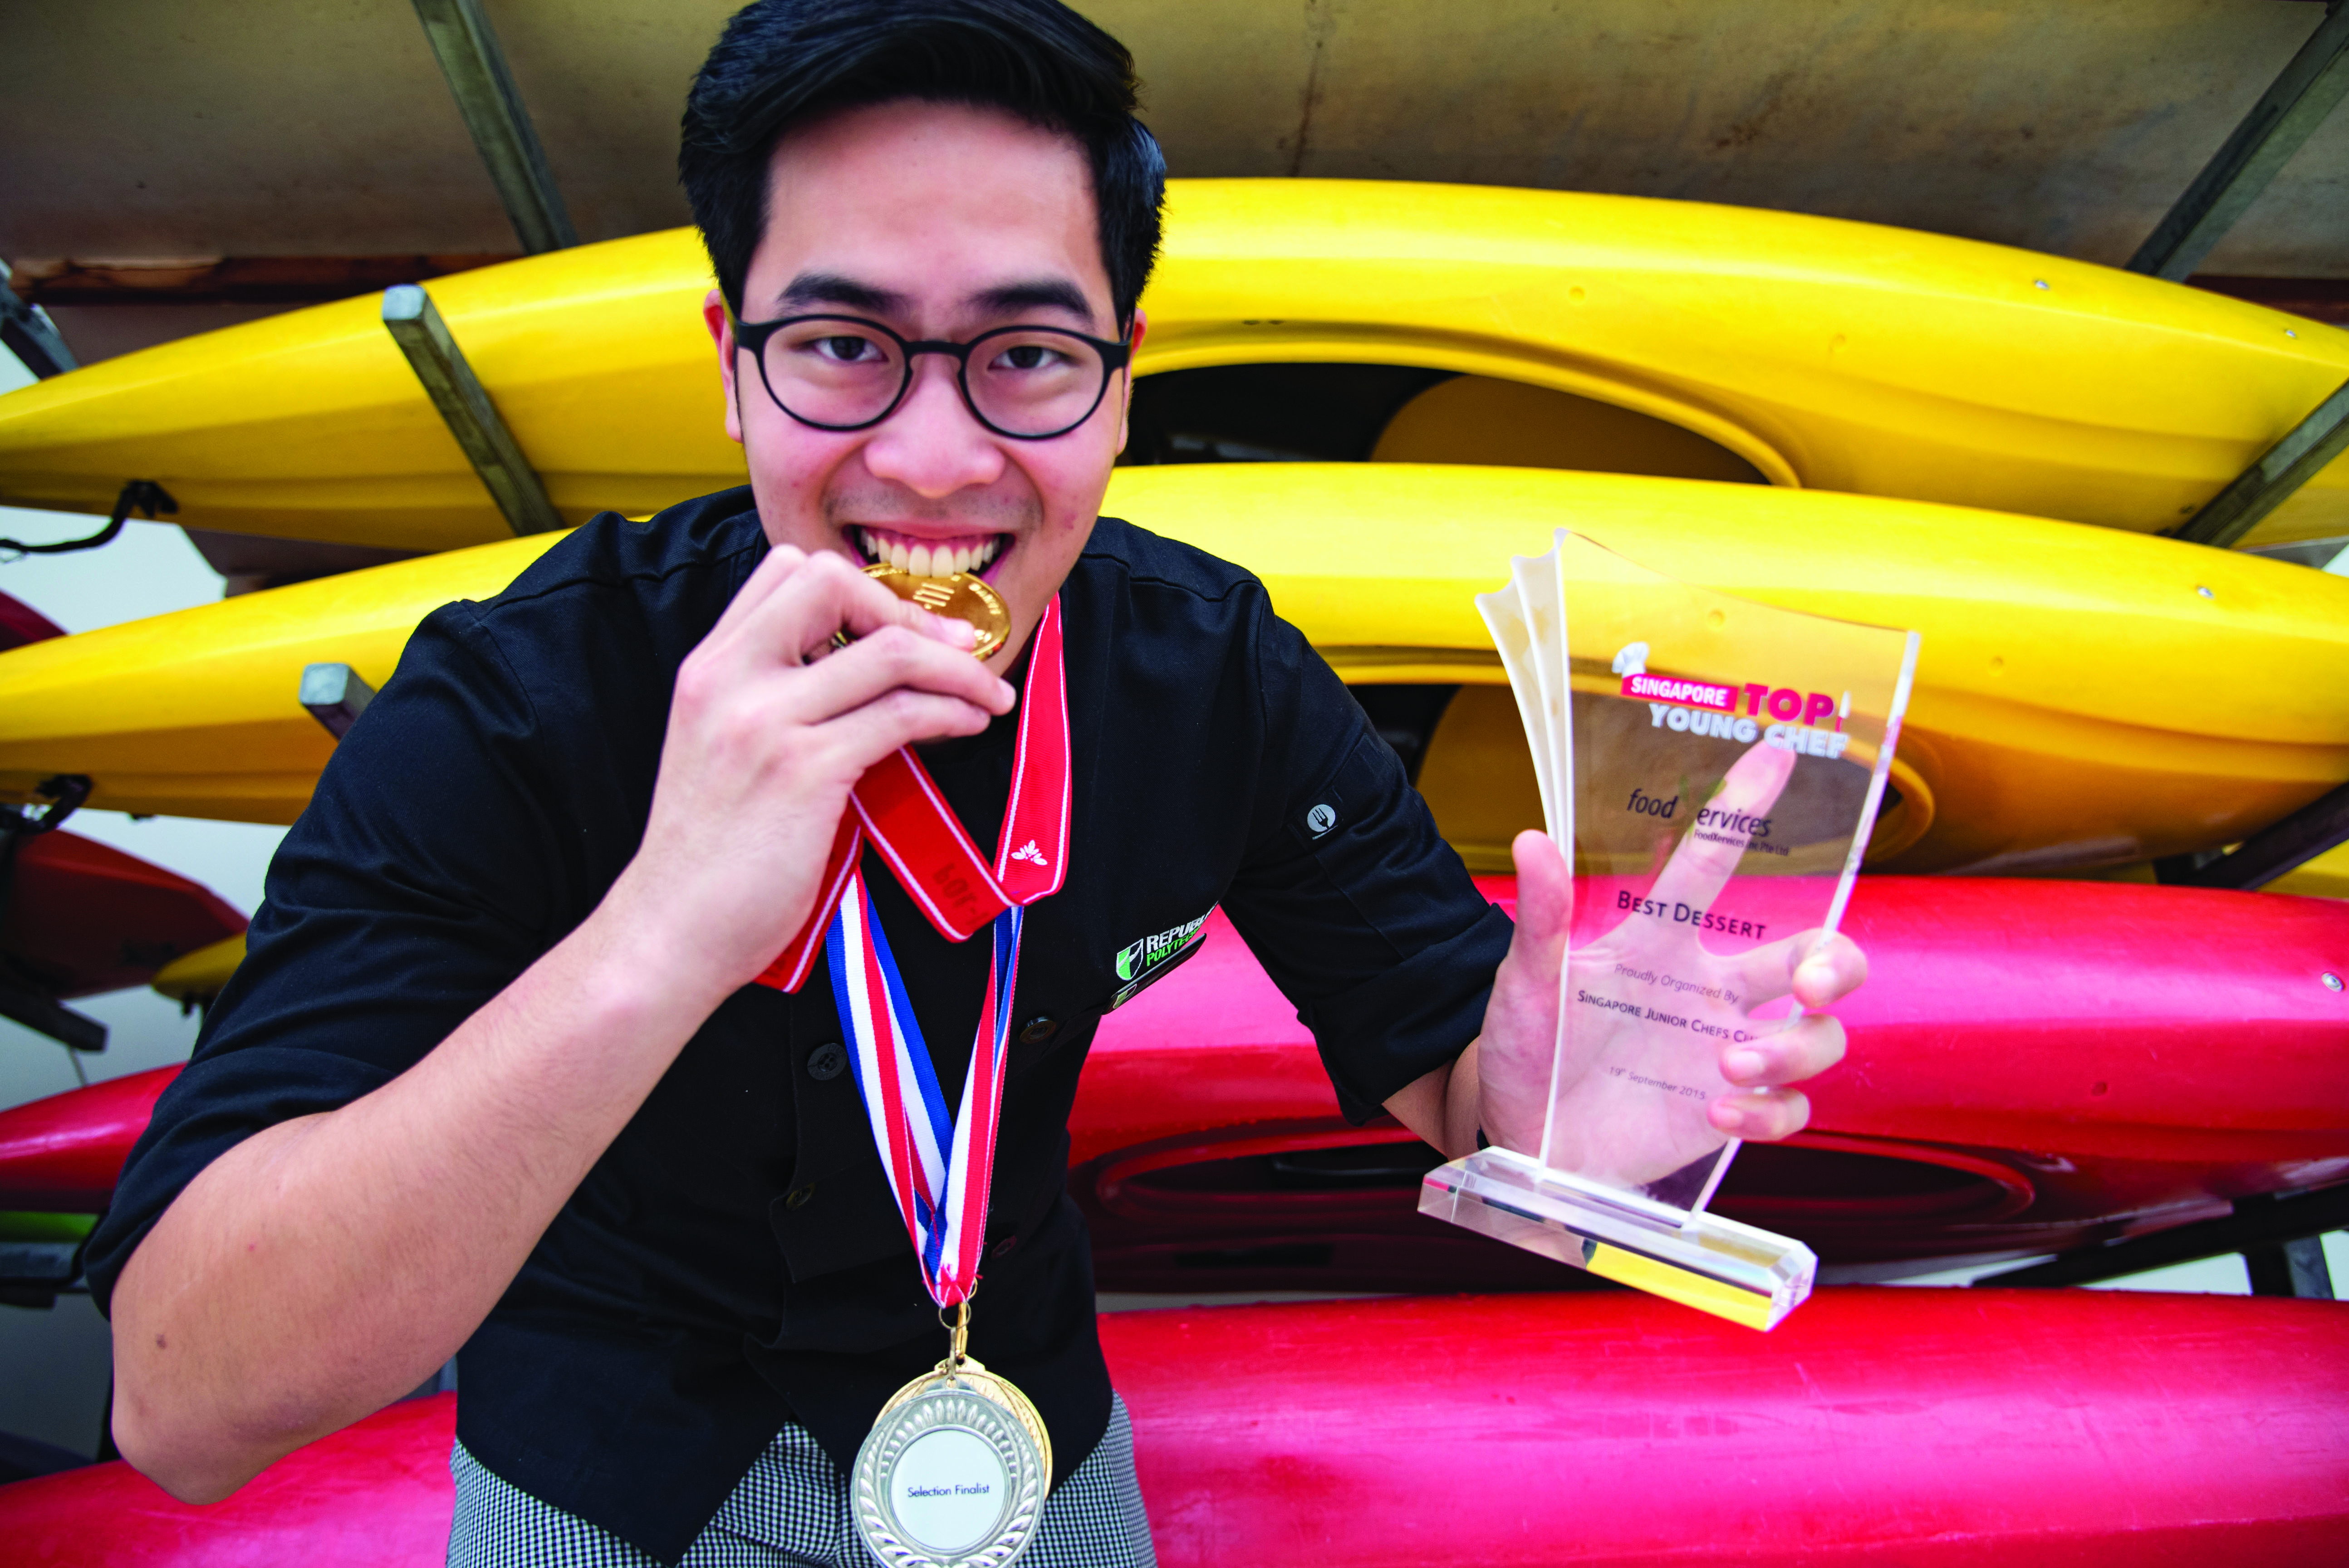 THE SPORTY CHEF: At only 20, canoeist Tan Wei Shan has won Mediacorp’s Neighborhood Chef 2, bagged a gold medal in POL-ITE Games and was recently named Sportsman of the Year at the Glitz Awards. Photo: Angela Lim